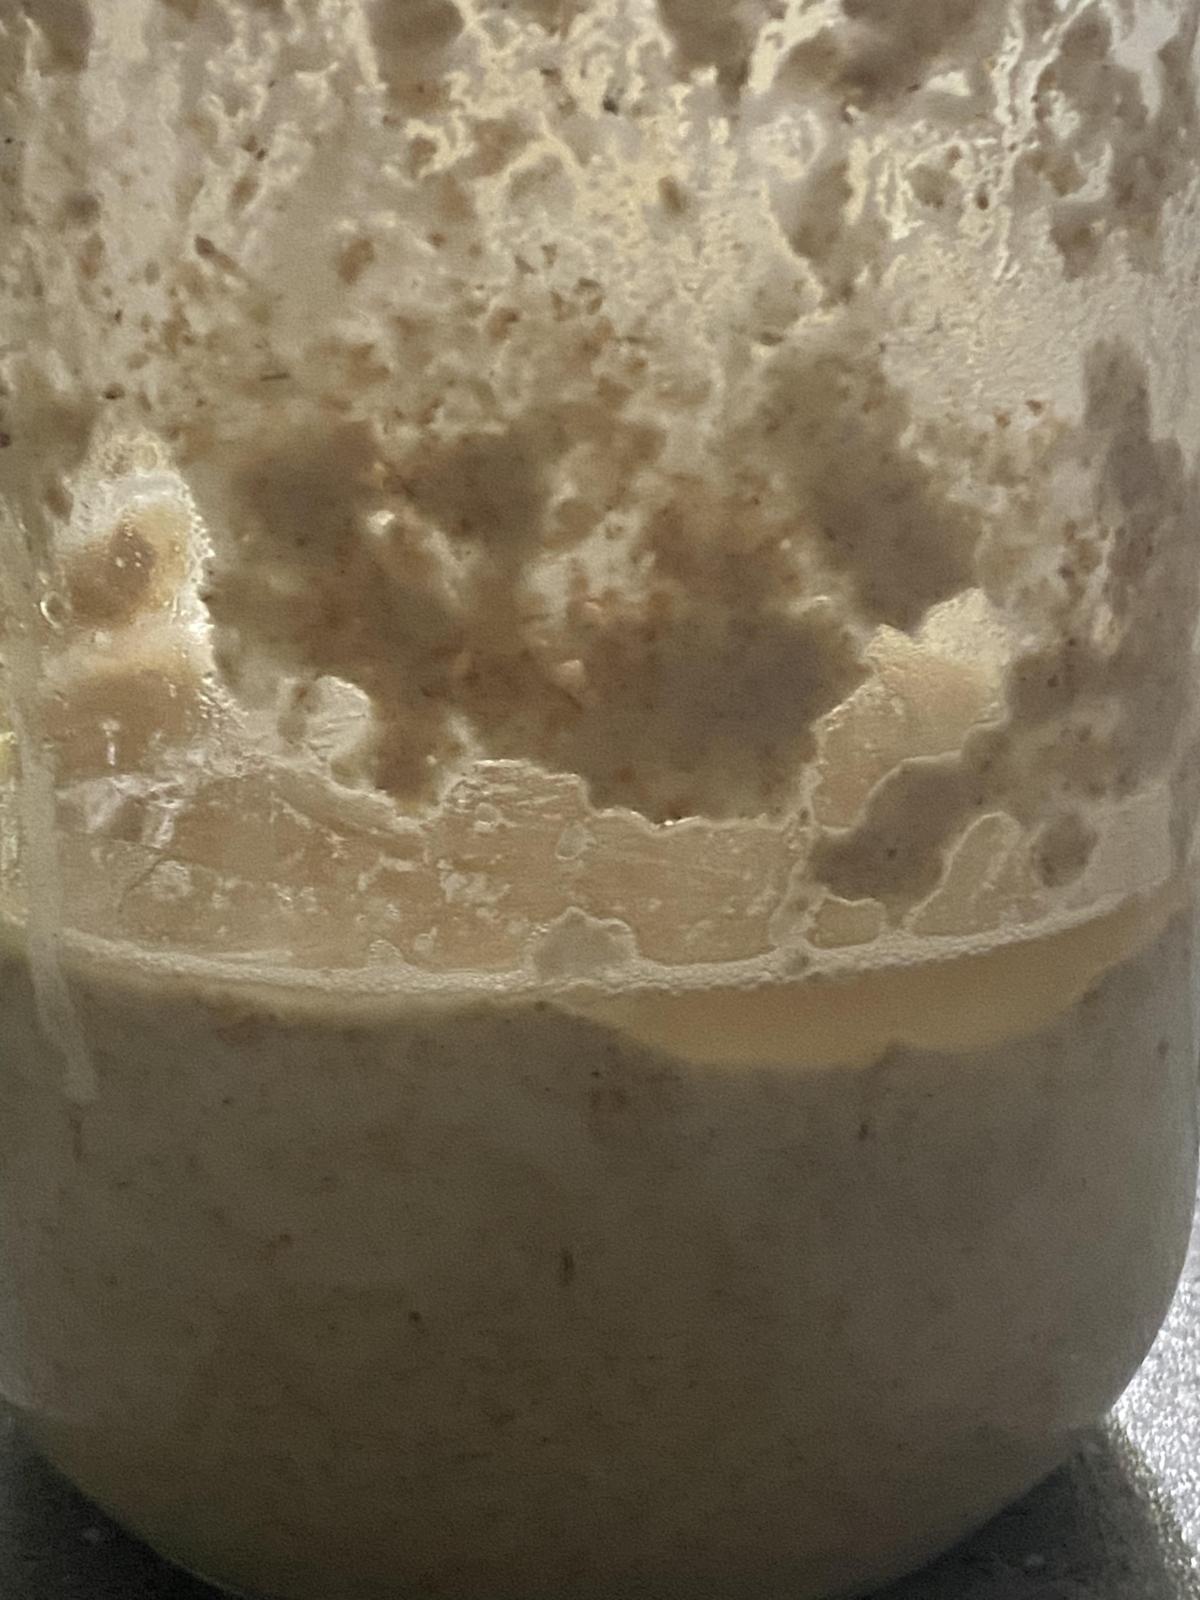 Making an Incredible Sourdough Starter from Scratch in 7 Easy Steps